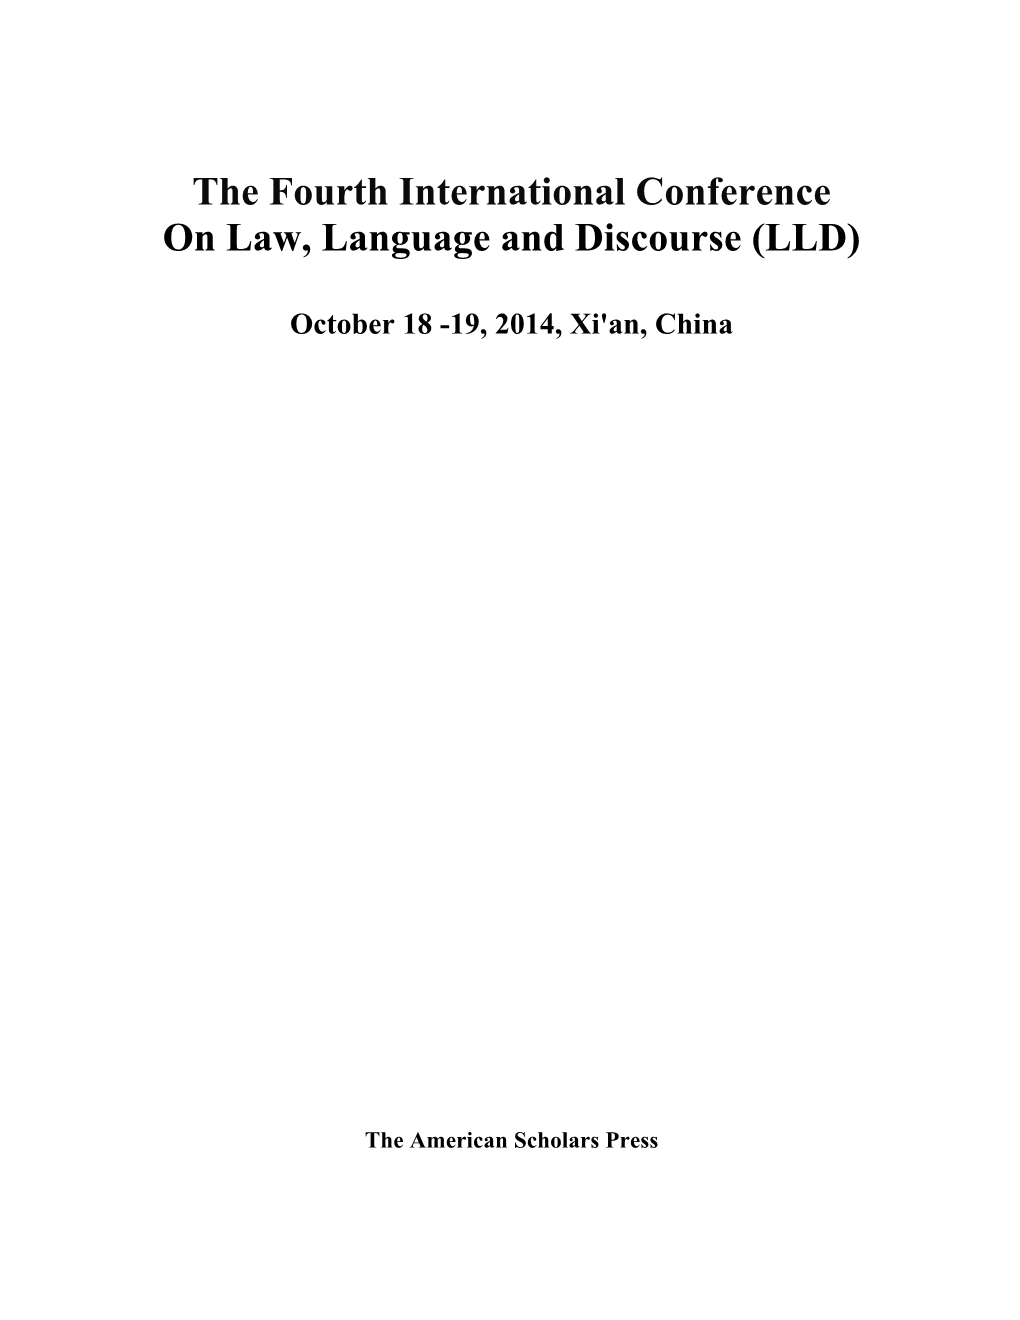 The Fourth International Conference on Law, Language and Discourse (LLD)